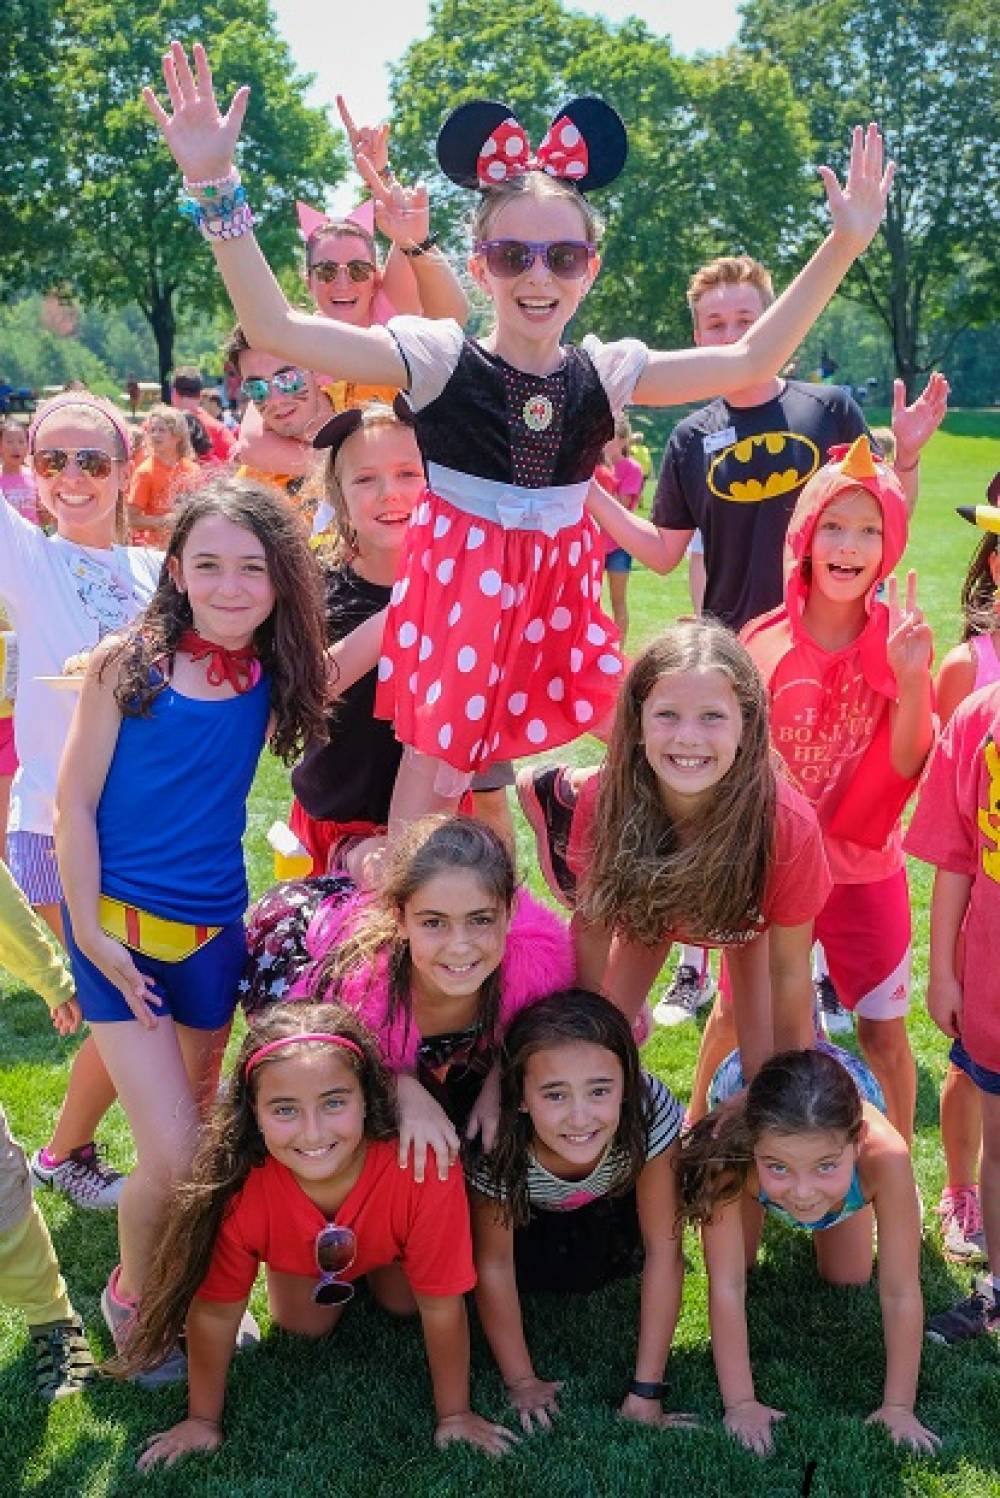 TOP MASSACHUSETTS TENNIS CAMP: Nobles Day Camp is a Top Tennis Summer Camp located in Dedham Massachusetts offering many fun and enriching Tennis and other camp programs. 